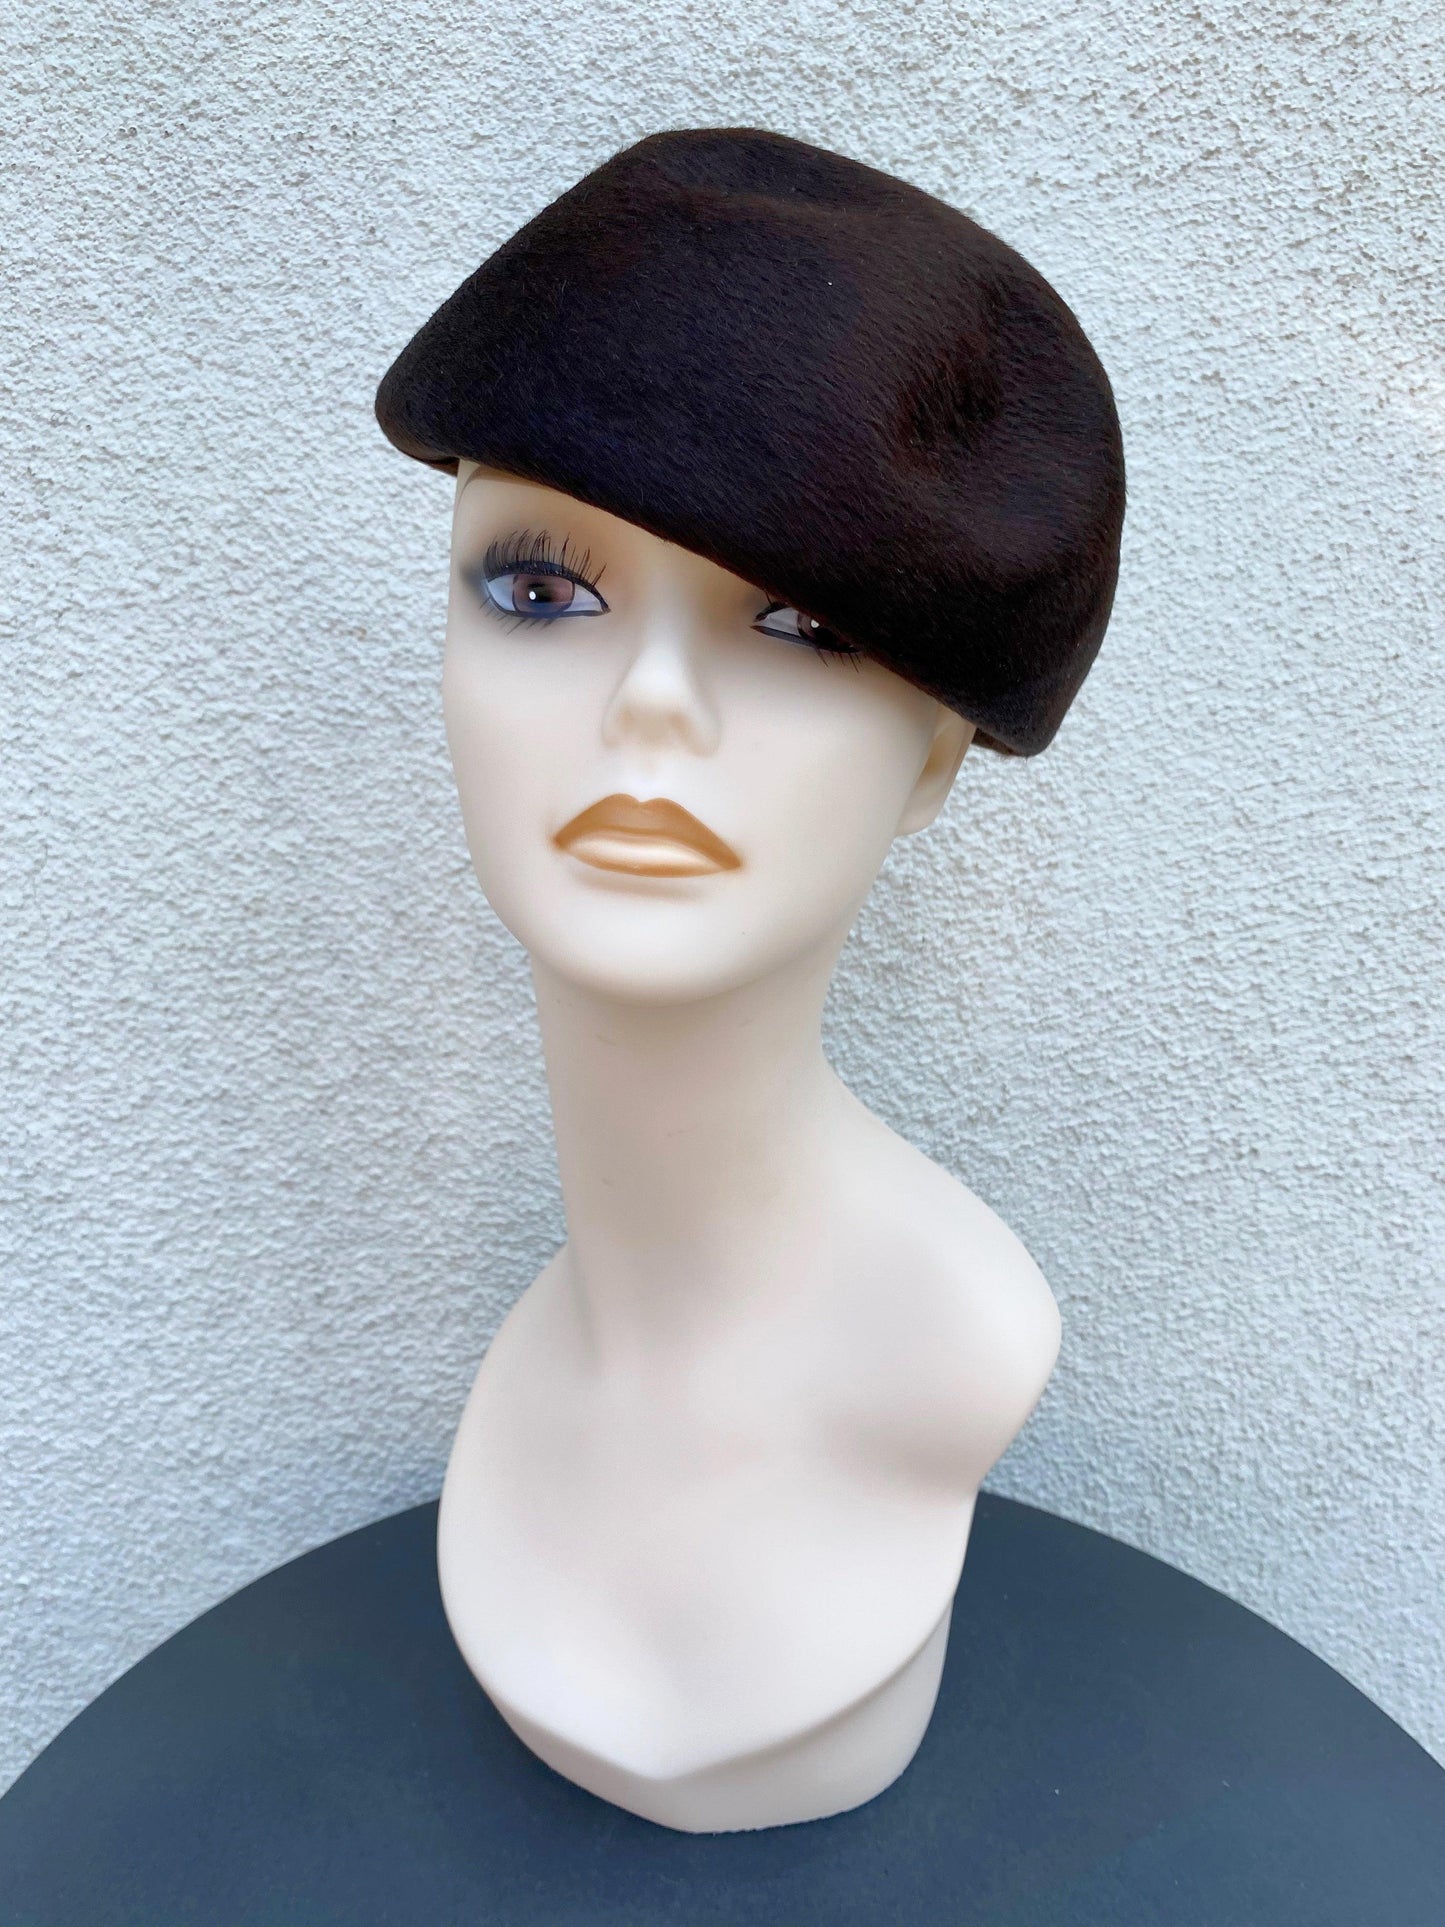 Italian Suede Hat With Beaded Ball Embellishment - A Walk Thru Time Vintage